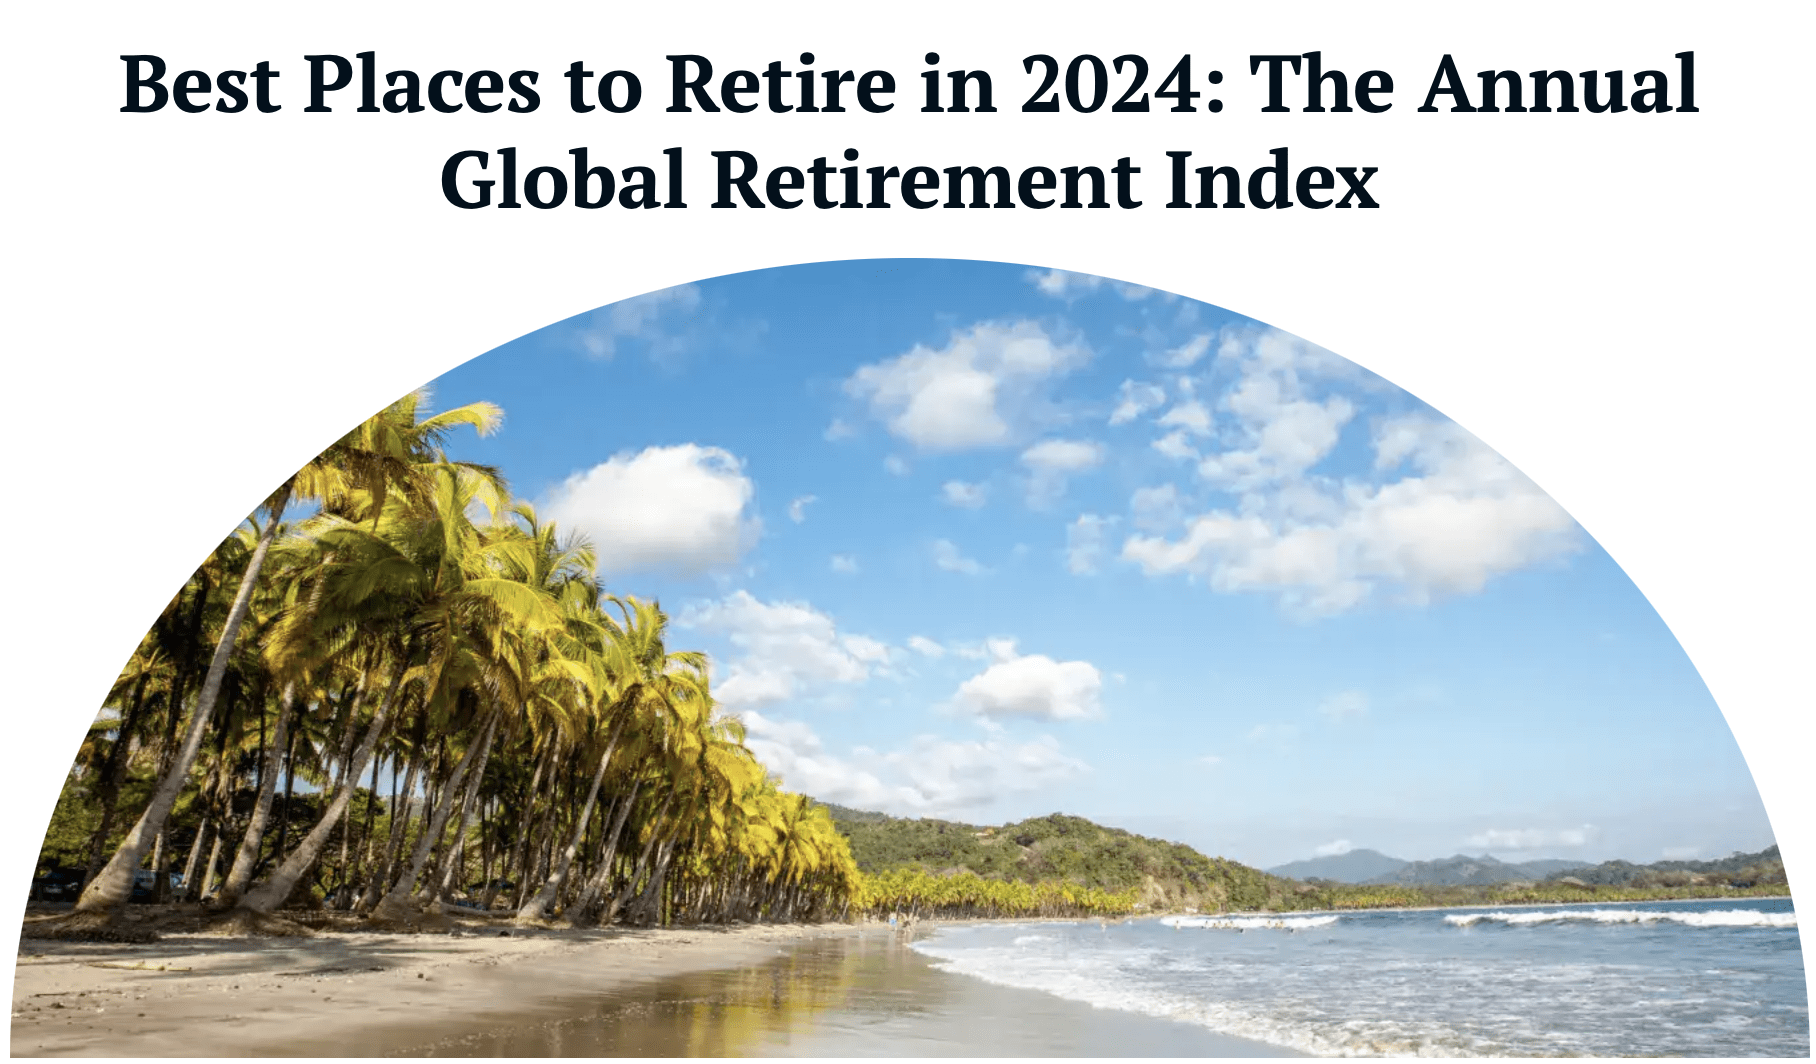 Key insights from International Investing Magazine’s Top 10 Places to Retire in 2024